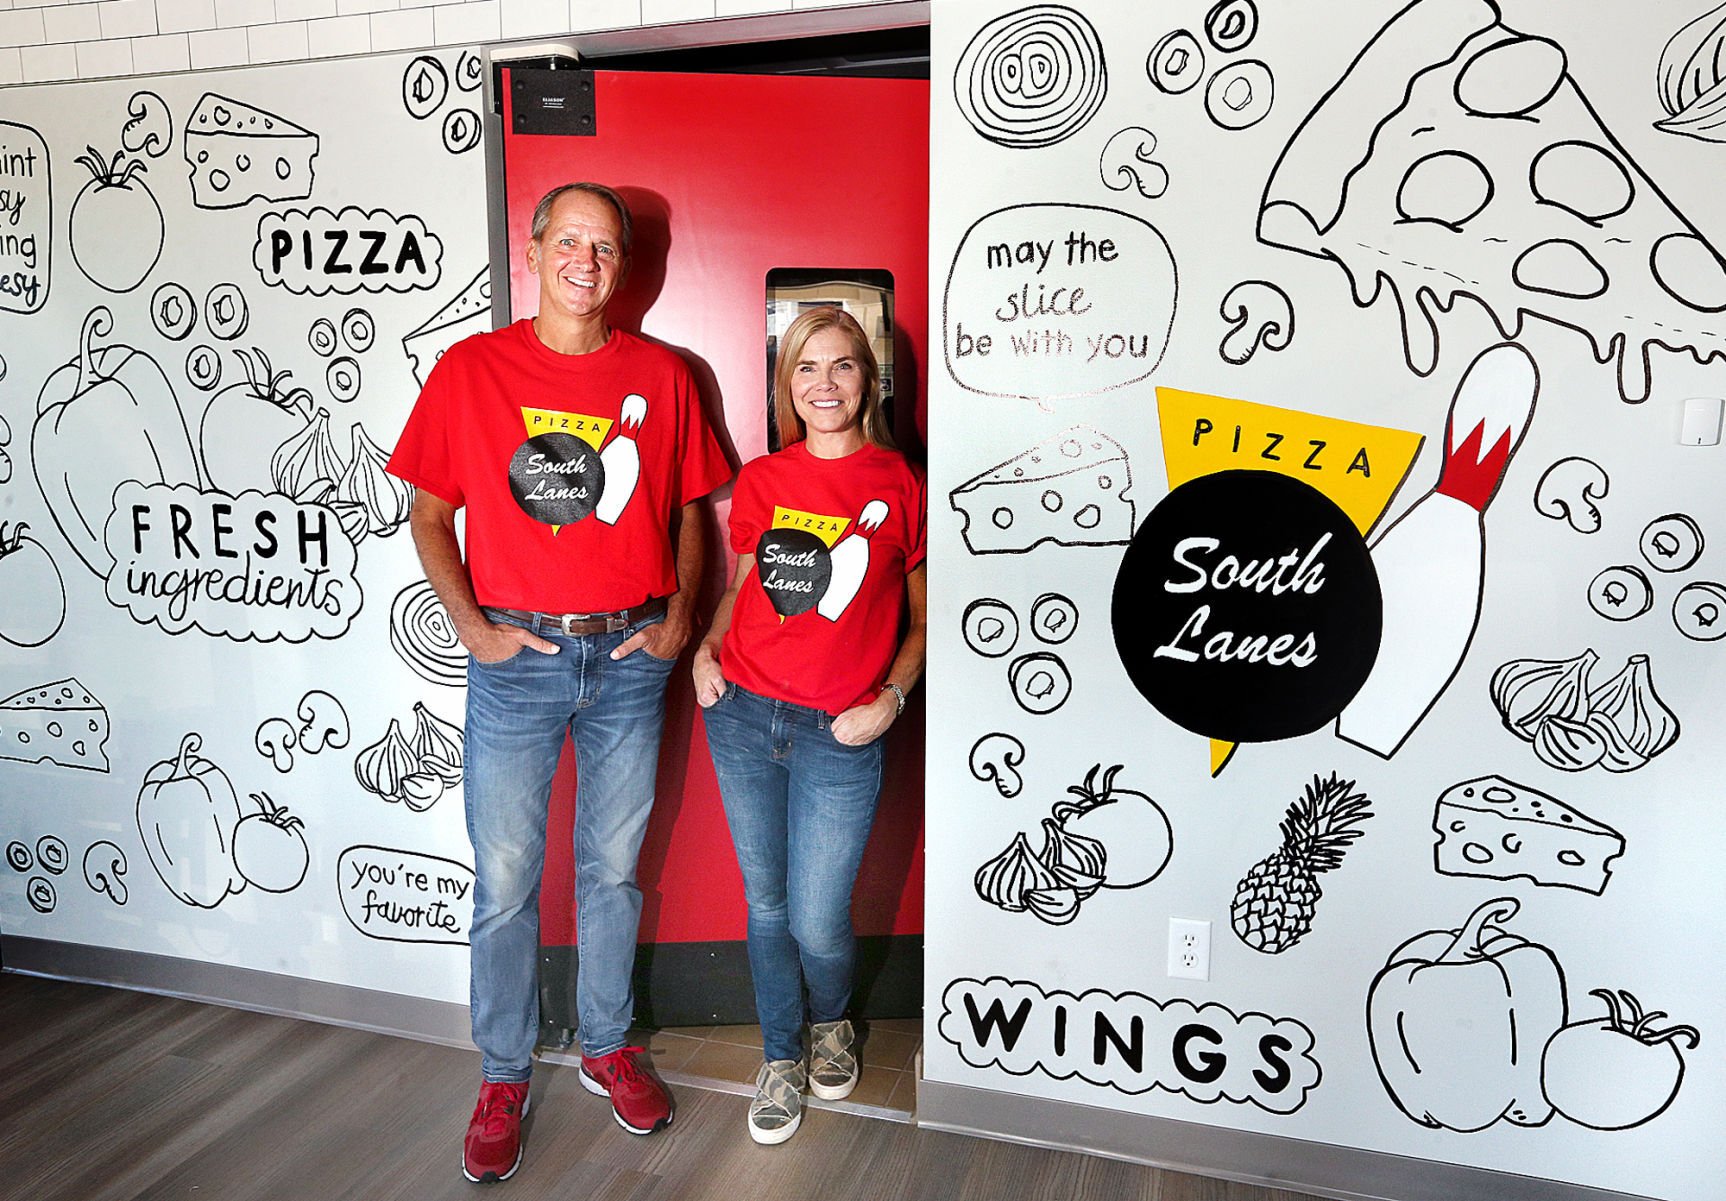 South Lanes Pizza opens Sunday in new La Crosse location image